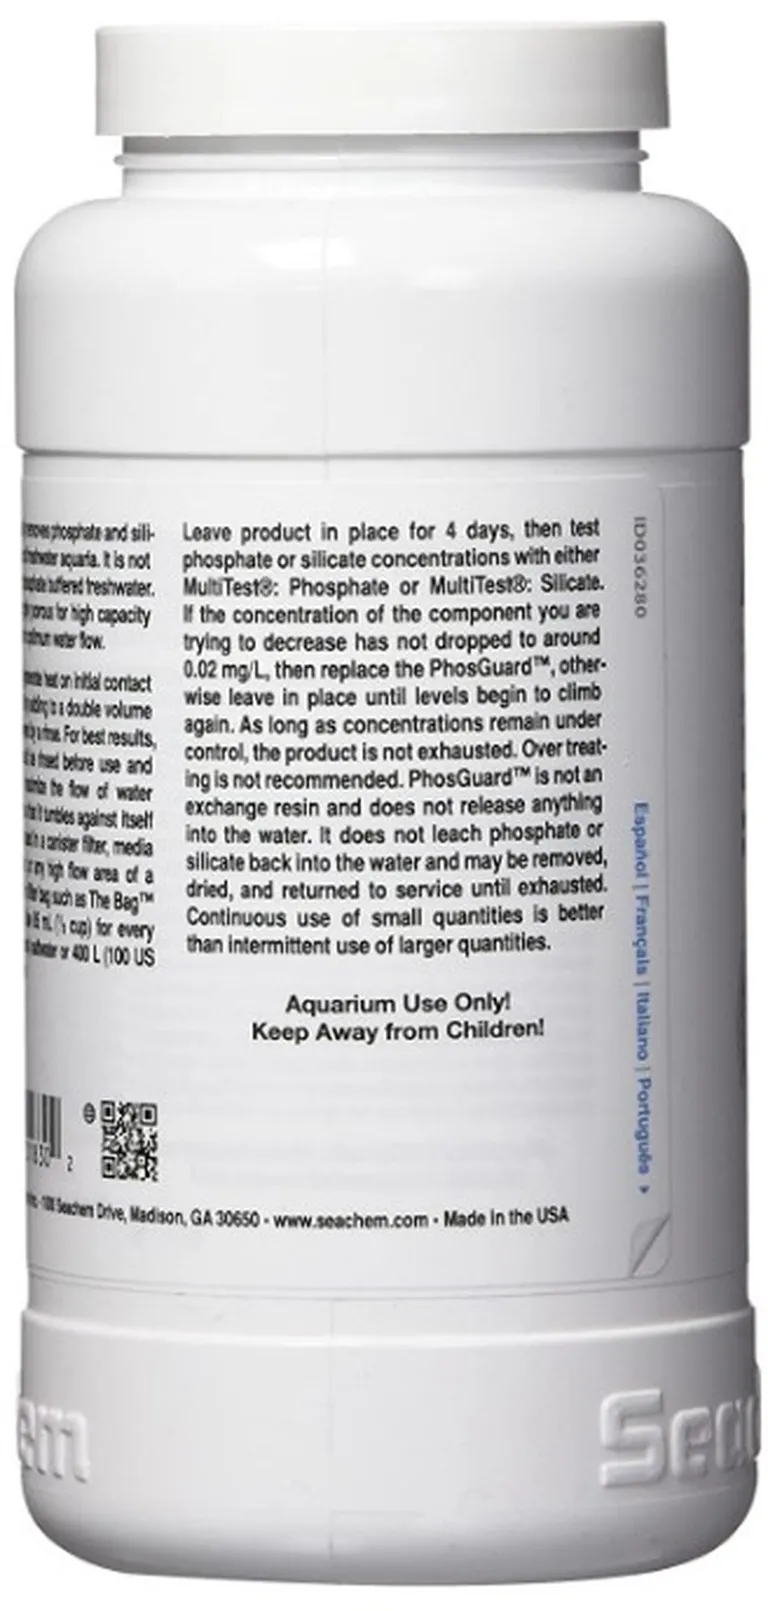 Seachem PhosGuard Rapidly Removes Phosphate and Silicate for Marine and Freshwater Aquariums Photo 2